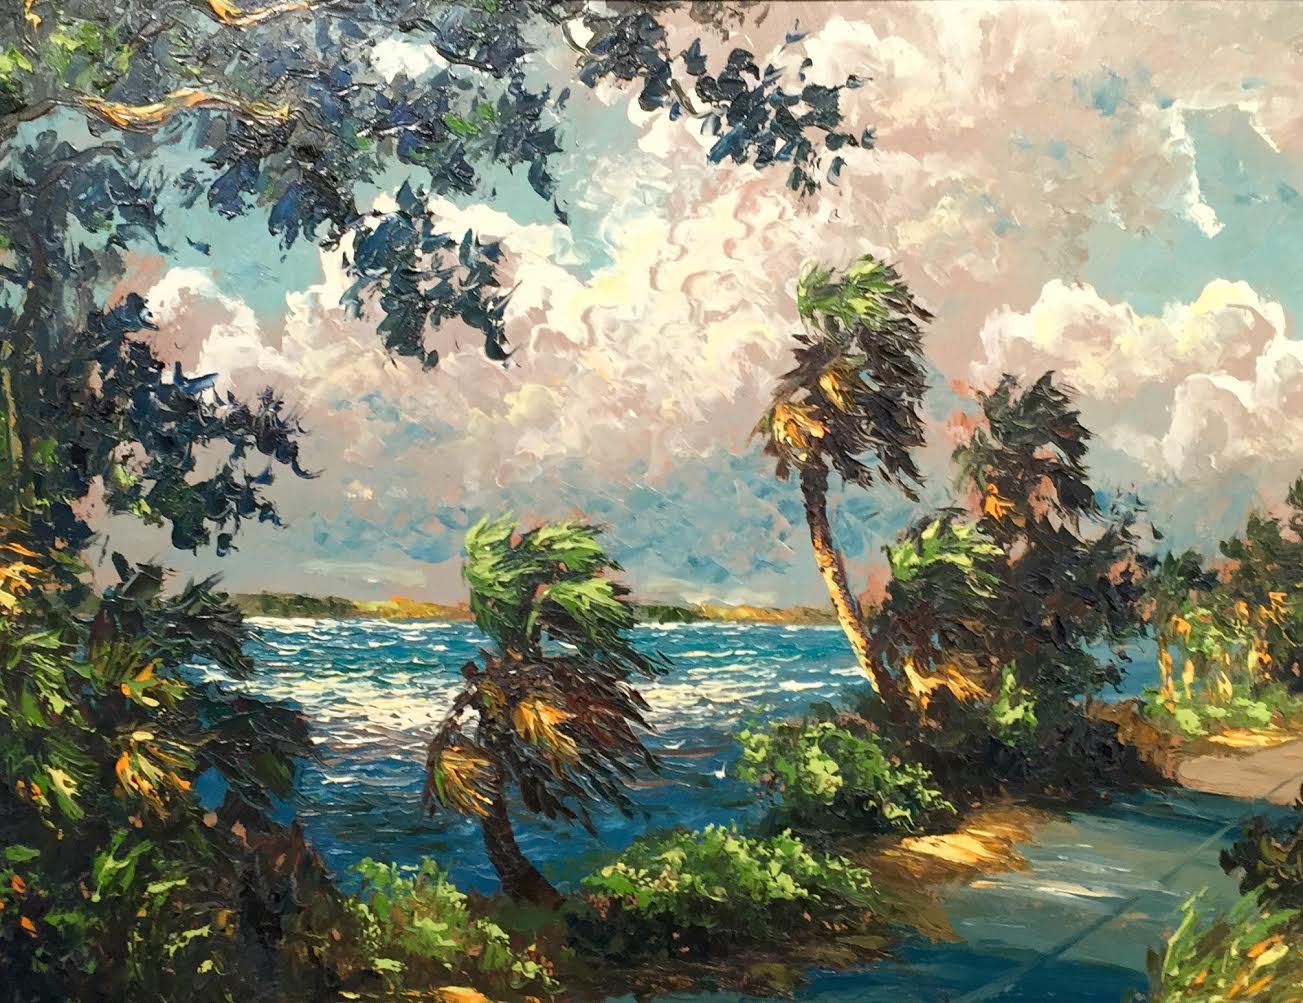 Alfred Hair painting portraying a road lined with yellow and green palm trees and bushes blowing in the wind with a blue body of water running alongside the road and clouds overhead.